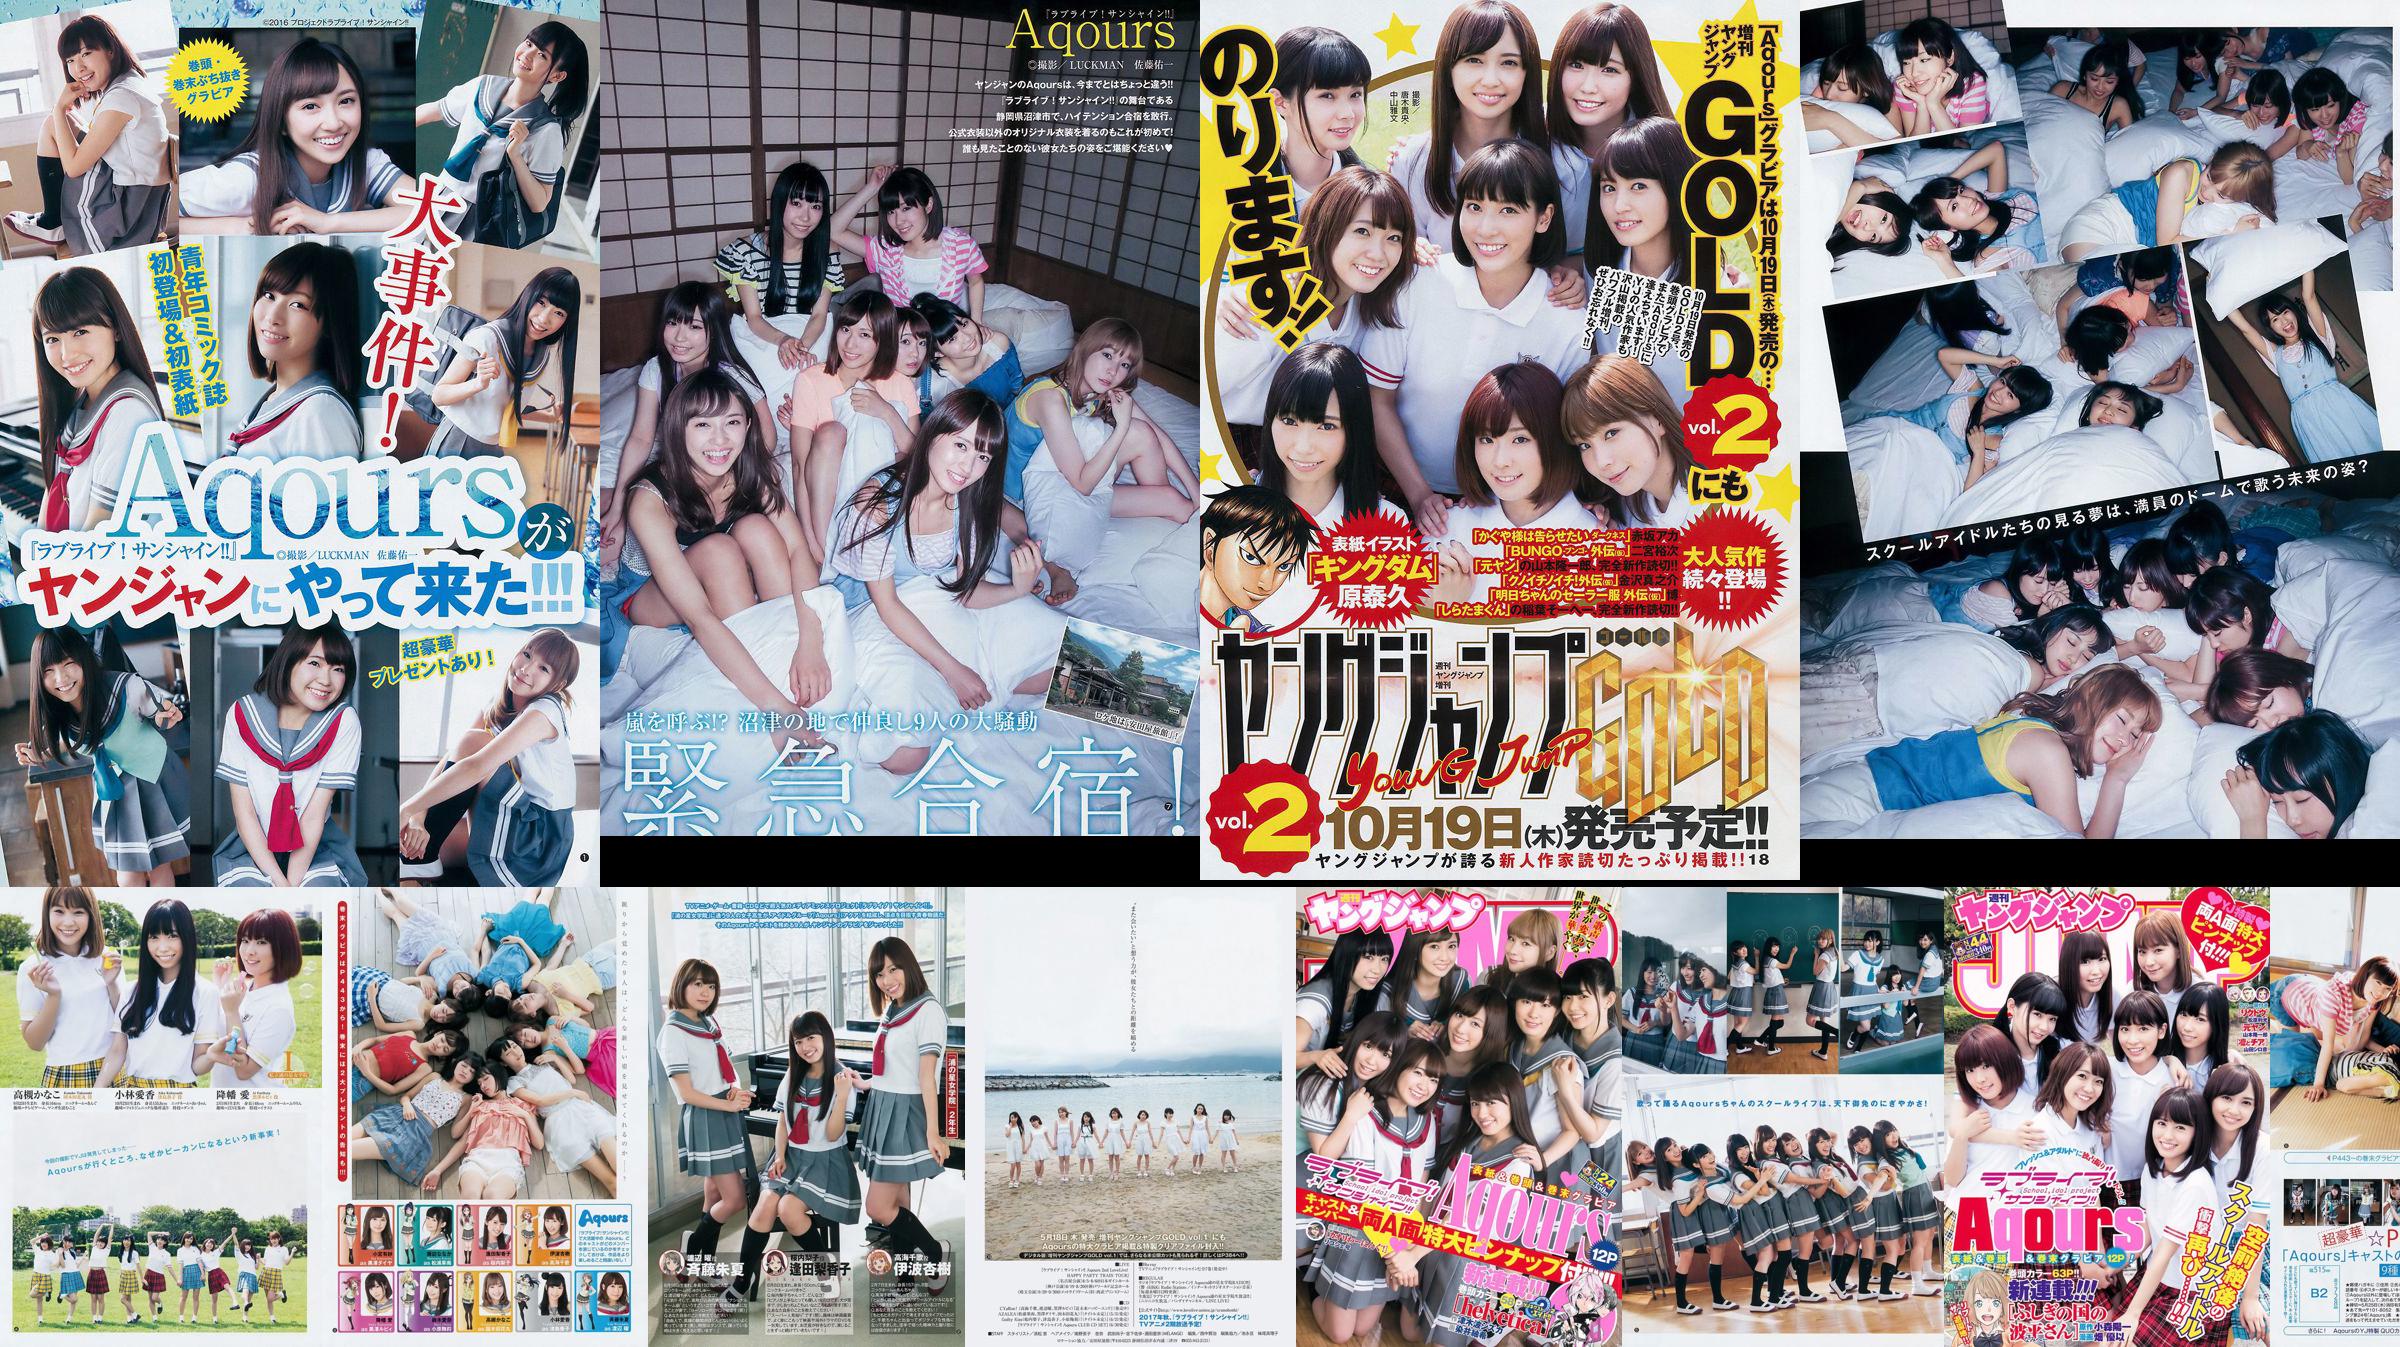 Japan Combination Aqours [Weekly Young Jump] Magazine photo n ° 44 2017 No.15d688 Page 4